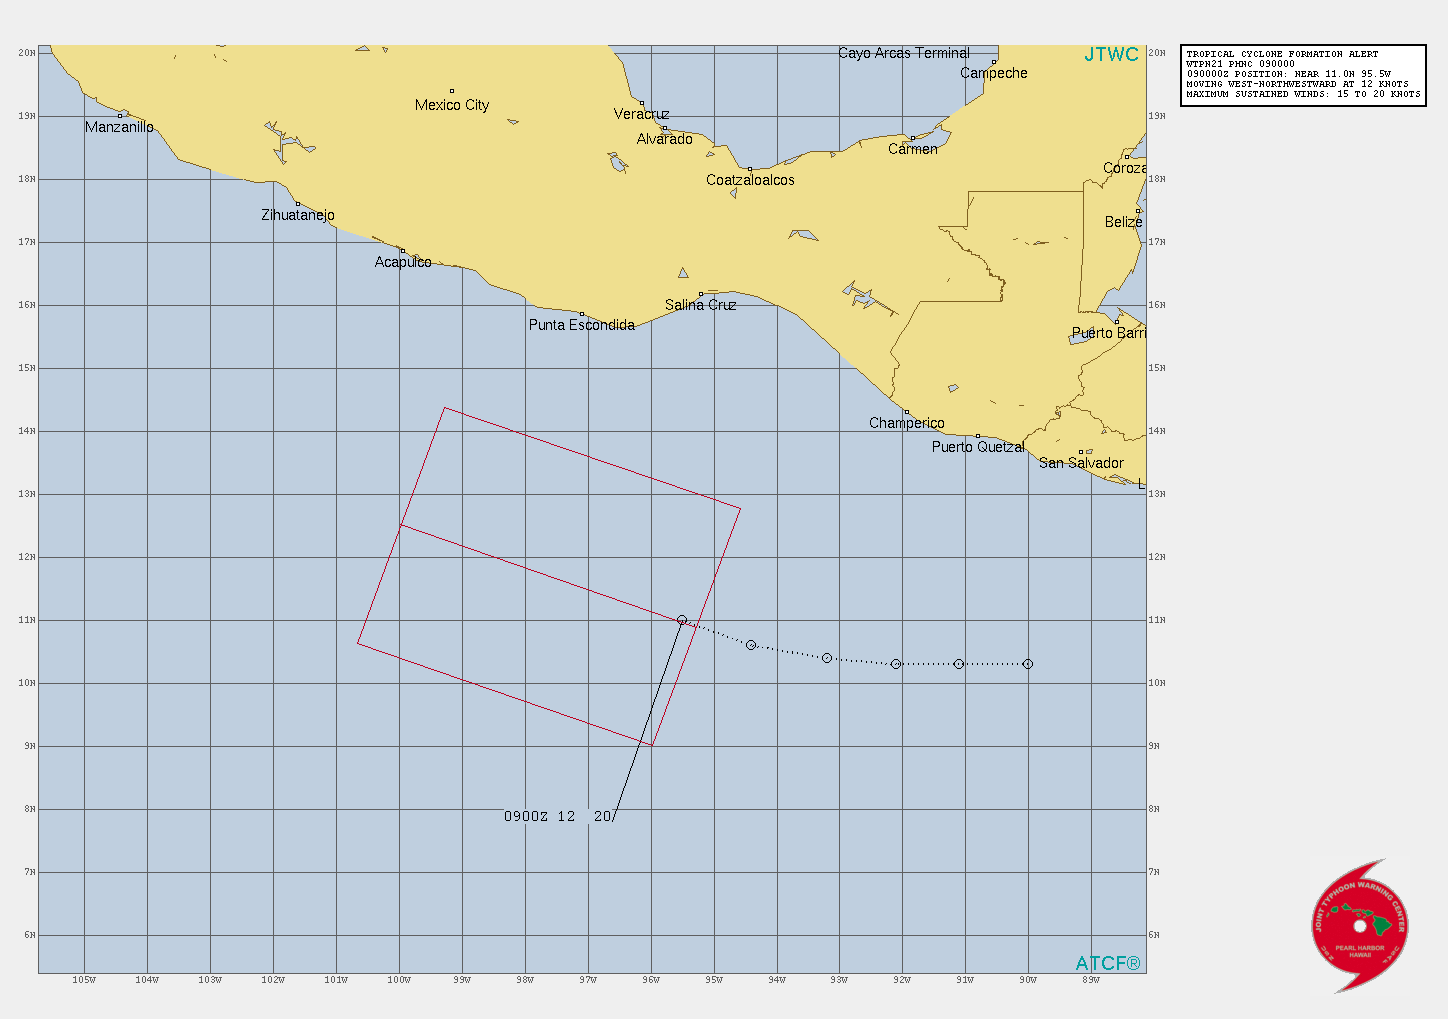 INVEST 93E. TROPICAL CYCLONE FORMATION ALERT ISSUED AT 08/17UTC.FORMATION OF A SIGNIFICANT TROPICAL CYCLONE IS POSSIBLE WITHIN 120 NM EITHER SIDE OF A LINE FROM 10.9N 95.2W TO 12.9N 101.4W WITHIN THE NEXT 12 TO 24 HOURS. AVAILABLE DATA DOES NOT JUSTIFY ISSUANCE OF NUMBERED TROPICAL CYCLONE WARNINGS AT THIS TIME. WINDS IN THE AREA ARE ESTIMATED TO BE 15 TO 20 KNOTS. METSAT IMAGERY AT 090000Z INDICATES THAT A CIRCULATION CENTER IS LOCATED NEAR 11.0N 95.5W. THE SYSTEM IS MOVING WEST-NORTHWESTWARD AT 21 KM/H. 2. REMARKS: AN AREA OF CONVECTION (INVEST 93E) HAS PERSISTED NEAR  11.0N 95.5W, APPROXIMATELY 555 KM SOUTH SOUTHEAST OF PUNTA  ESCONDIDA, MEXICO. ANIMATED MULTISPECTRAL SATELLITE IMAGERY (MSI)  DEPICTS AN AREA OF FLARING CONVECTION AND BROAD TURNING AROUND AN  ILL-DEFINED LOW LEVEL CIRCULATION (LLC). A 082257UTC SSMIS 91GHZ  SATELLITE IMAGE REVEALS AREAS OF DEEP CONVECTION WITHOUT A CLEAR  LLC. ANALYSES INDICATE AN OVERALL FAVORABLE ENVIRONMENT FOR  DEVELOPMENT CHARACTERIZED BY EQUATORWARD OUTFLOW ALOFT, LOW TO  MODERATE (10-20 KT) VERTICAL WIND SHEAR (VWS), AND WARM (29-30C) SEA  SURFACE TEMPERATURES.MAXIMUM SUSTAINED SURFACE WINDS ARE ESTIMATED AT 15 TO 20 KNOTS.  MINIMUM SEA LEVEL PRESSURE IS ESTIMATED TO BE NEAR 1007 MB. THE  POTENTIAL FOR THE DEVELOPMENT OF A SIGNIFICANT TROPICAL CYCLONE  WITHIN THE NEXT 24 HOURS IS HIGH.